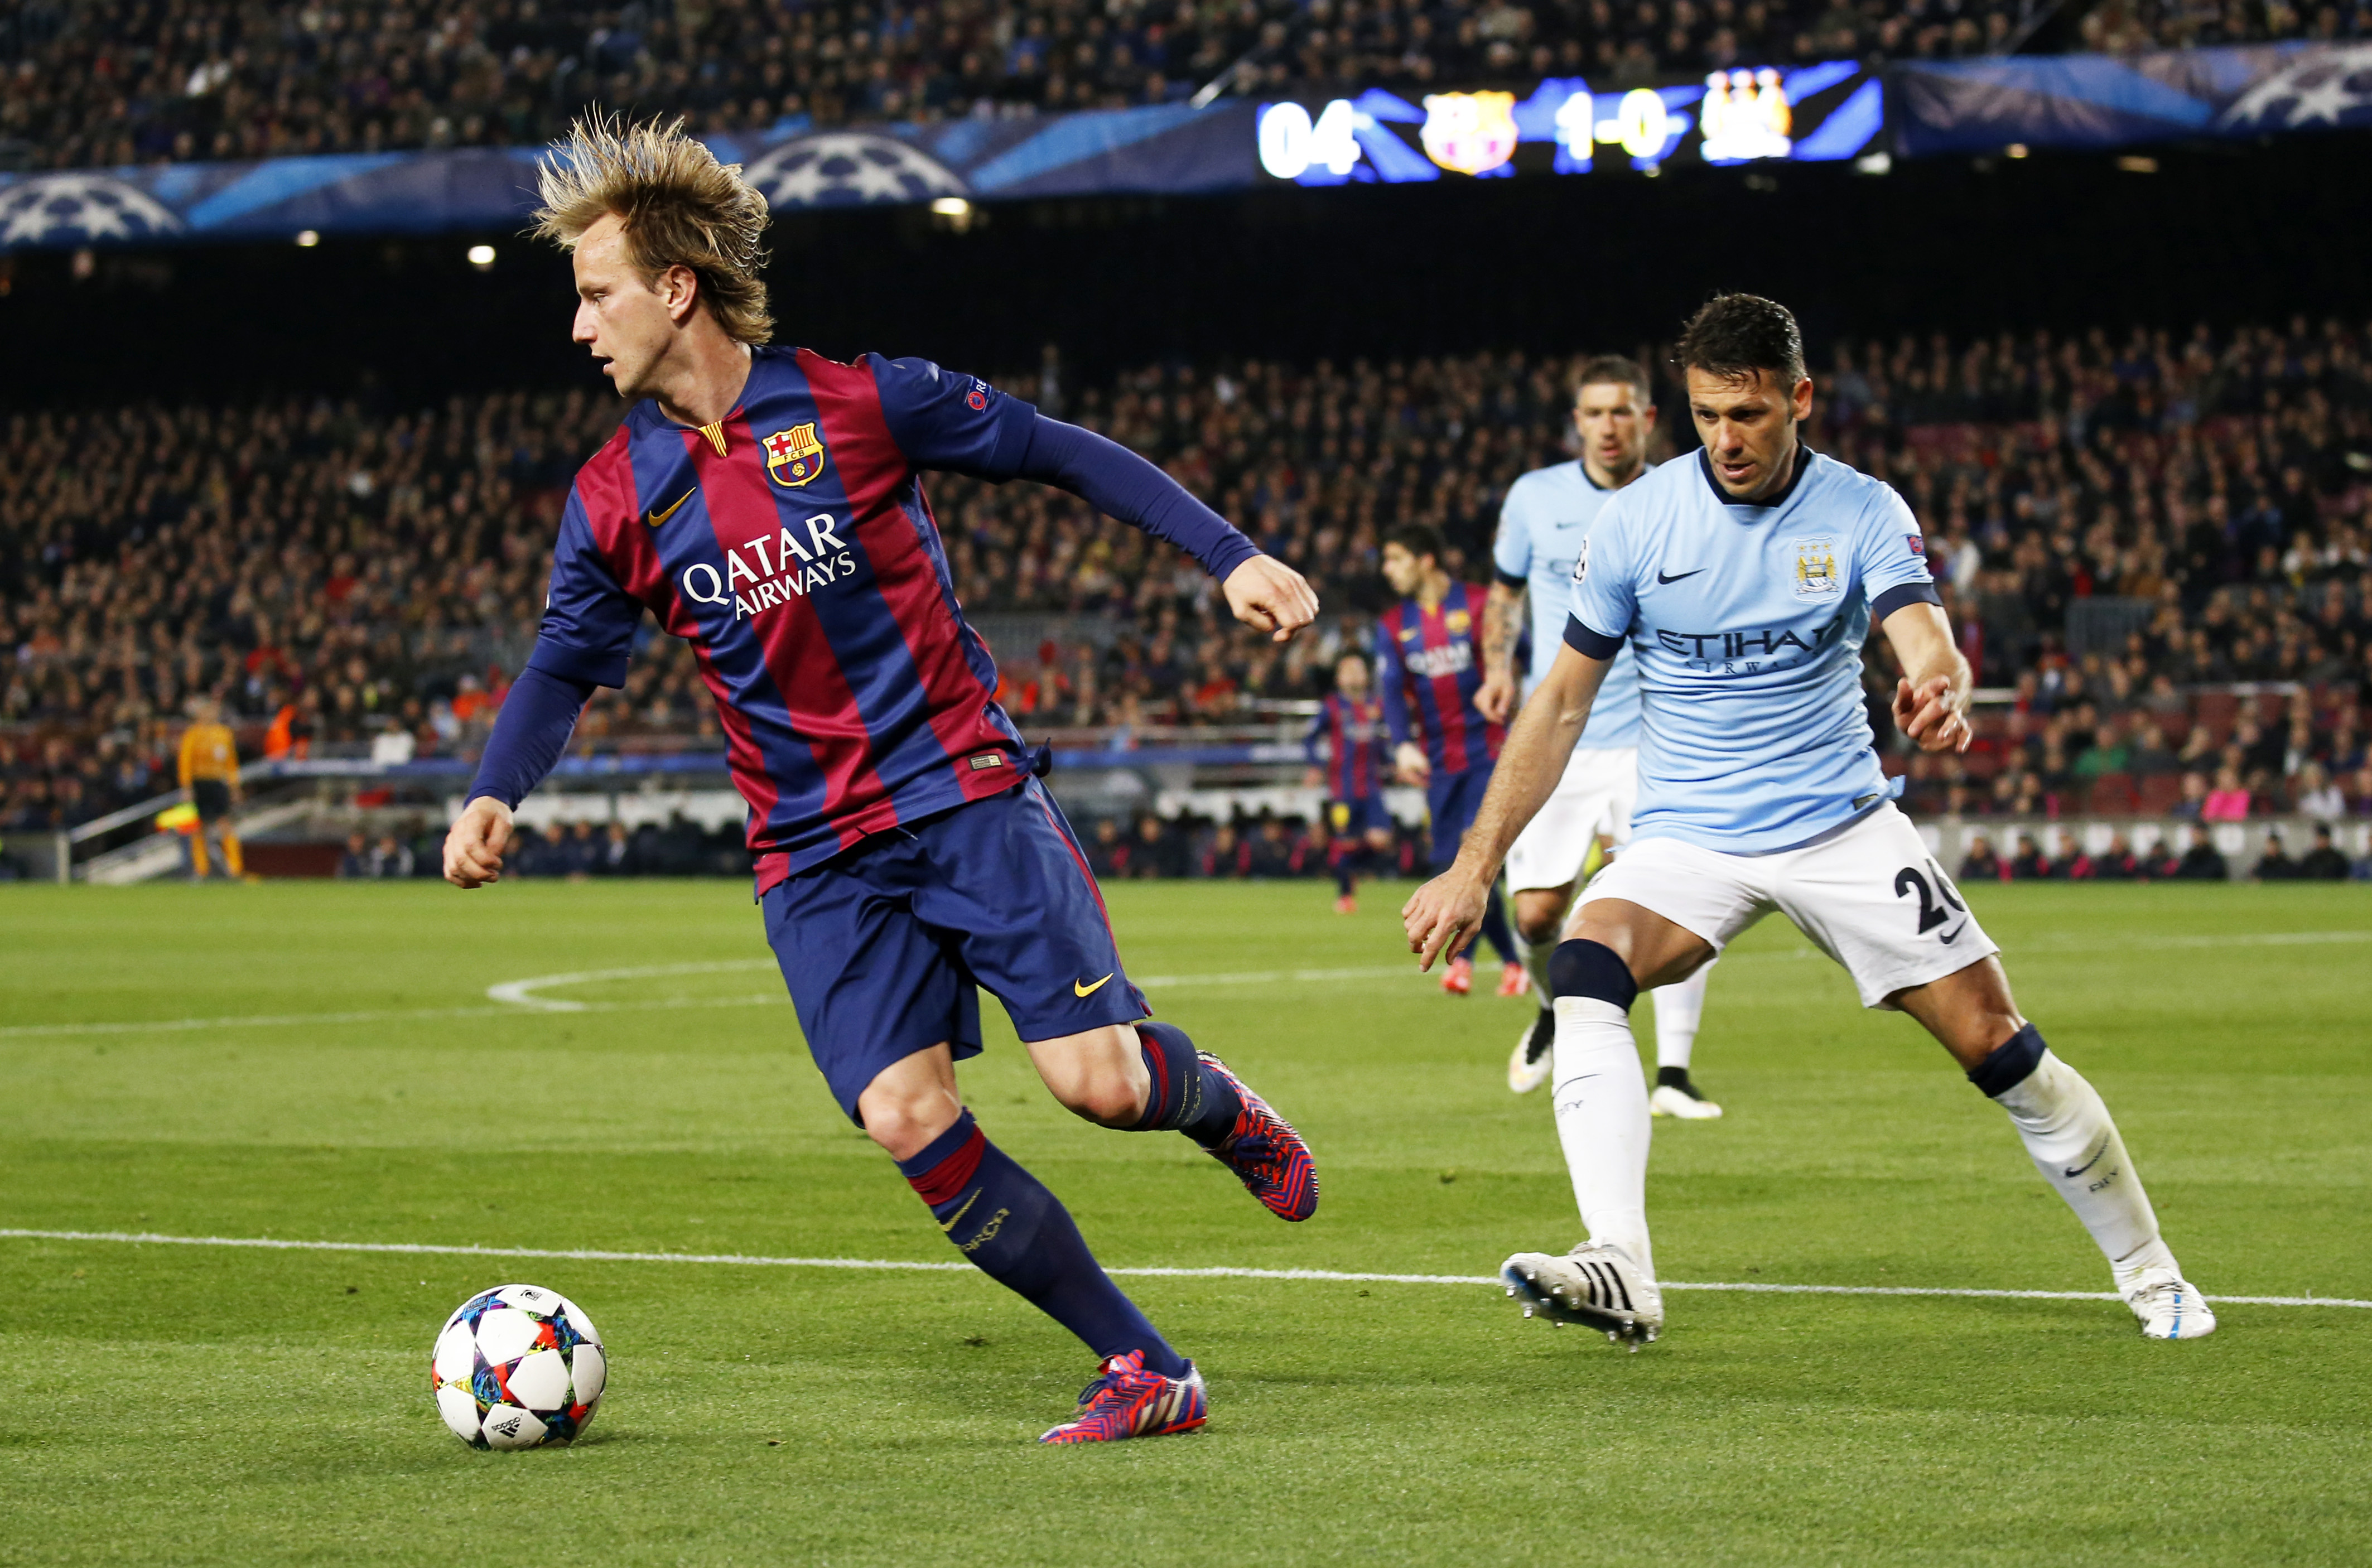 Ivan Rakitic in action for Barcelona against Manchester City in the Champions League in March 2015.